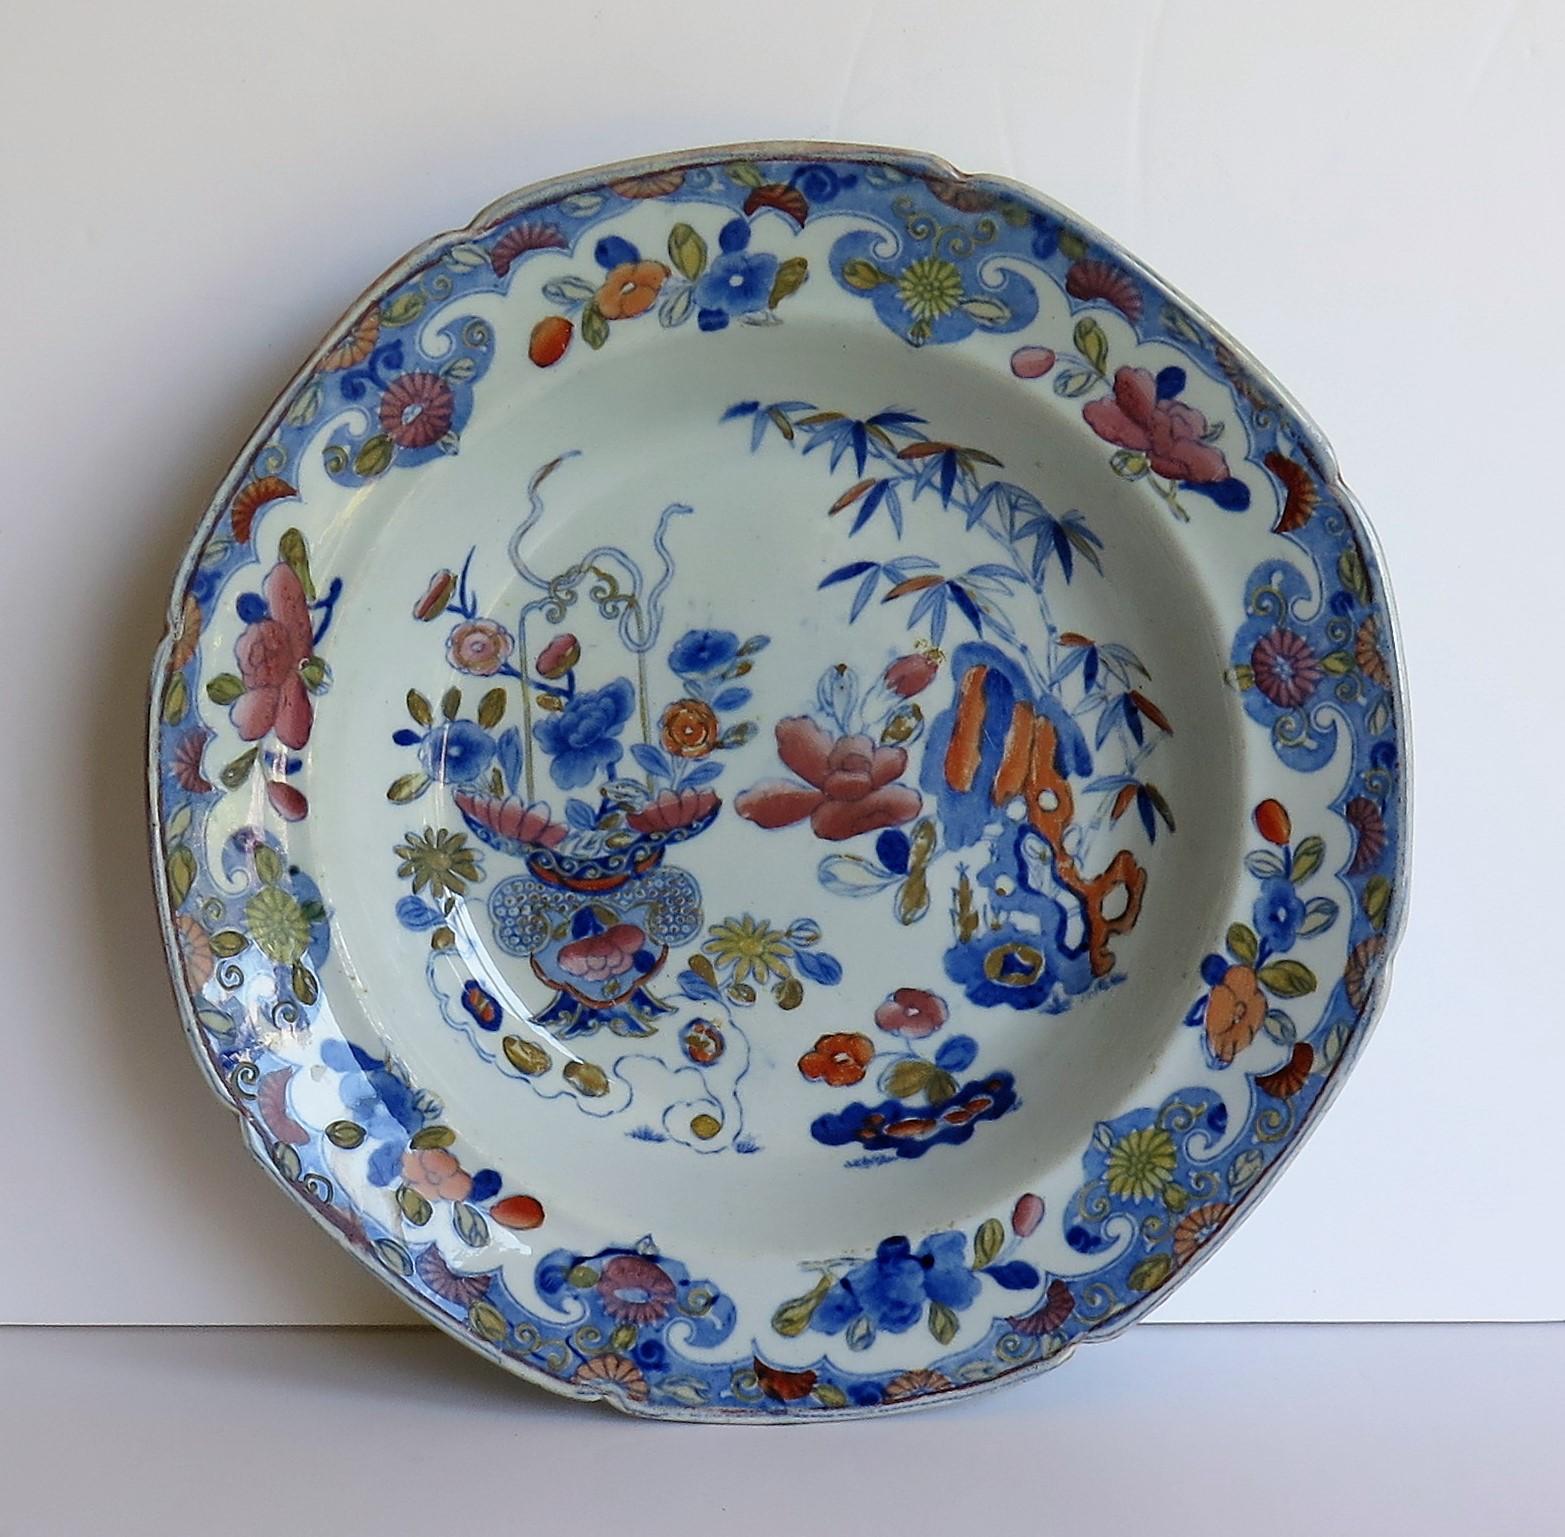 This is a very decorative soup bowl or plate by Mason's Ironstone, Lane Delph, England in the Bamboo and Basket pattern, dating to the very earliest transitional period of Mason's Ironstone, circa 1812.

The bowl is circular in shape with a